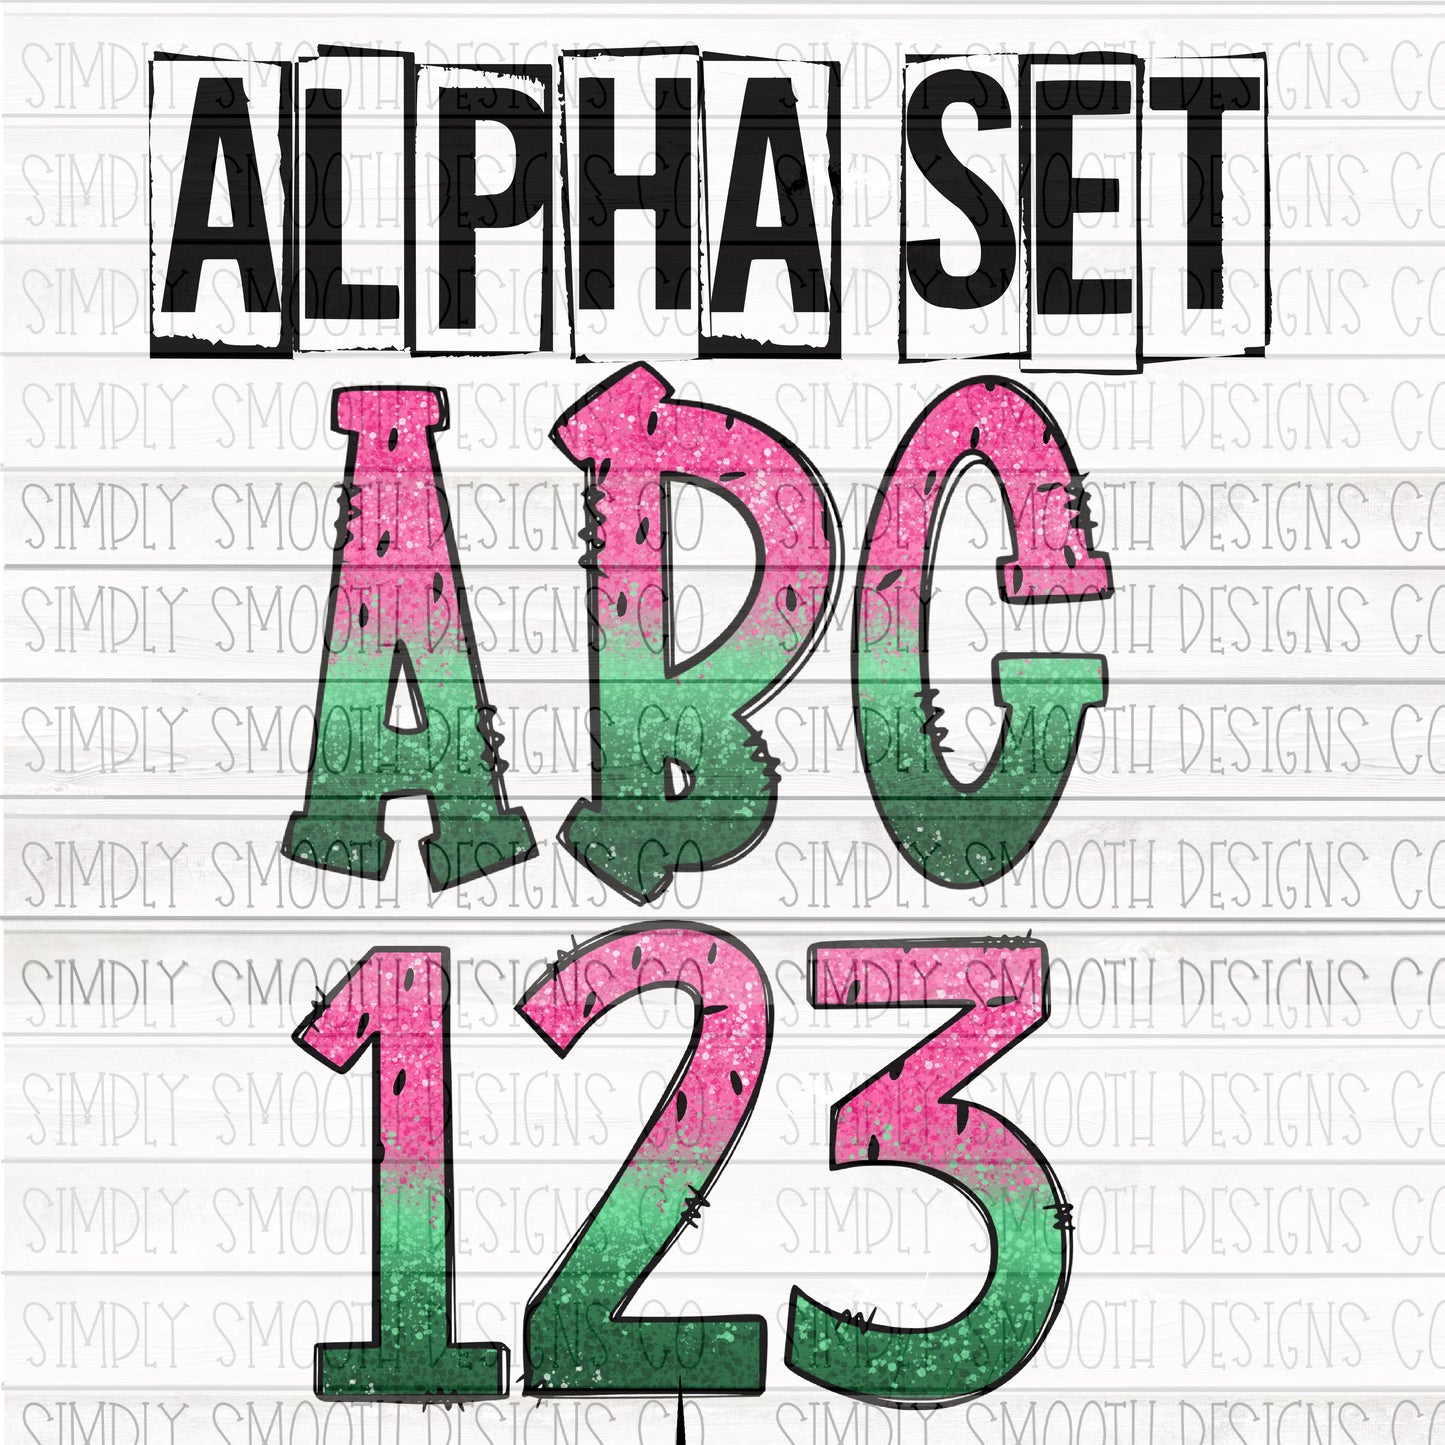 Watermelon print Alpha and number set. 36 total files